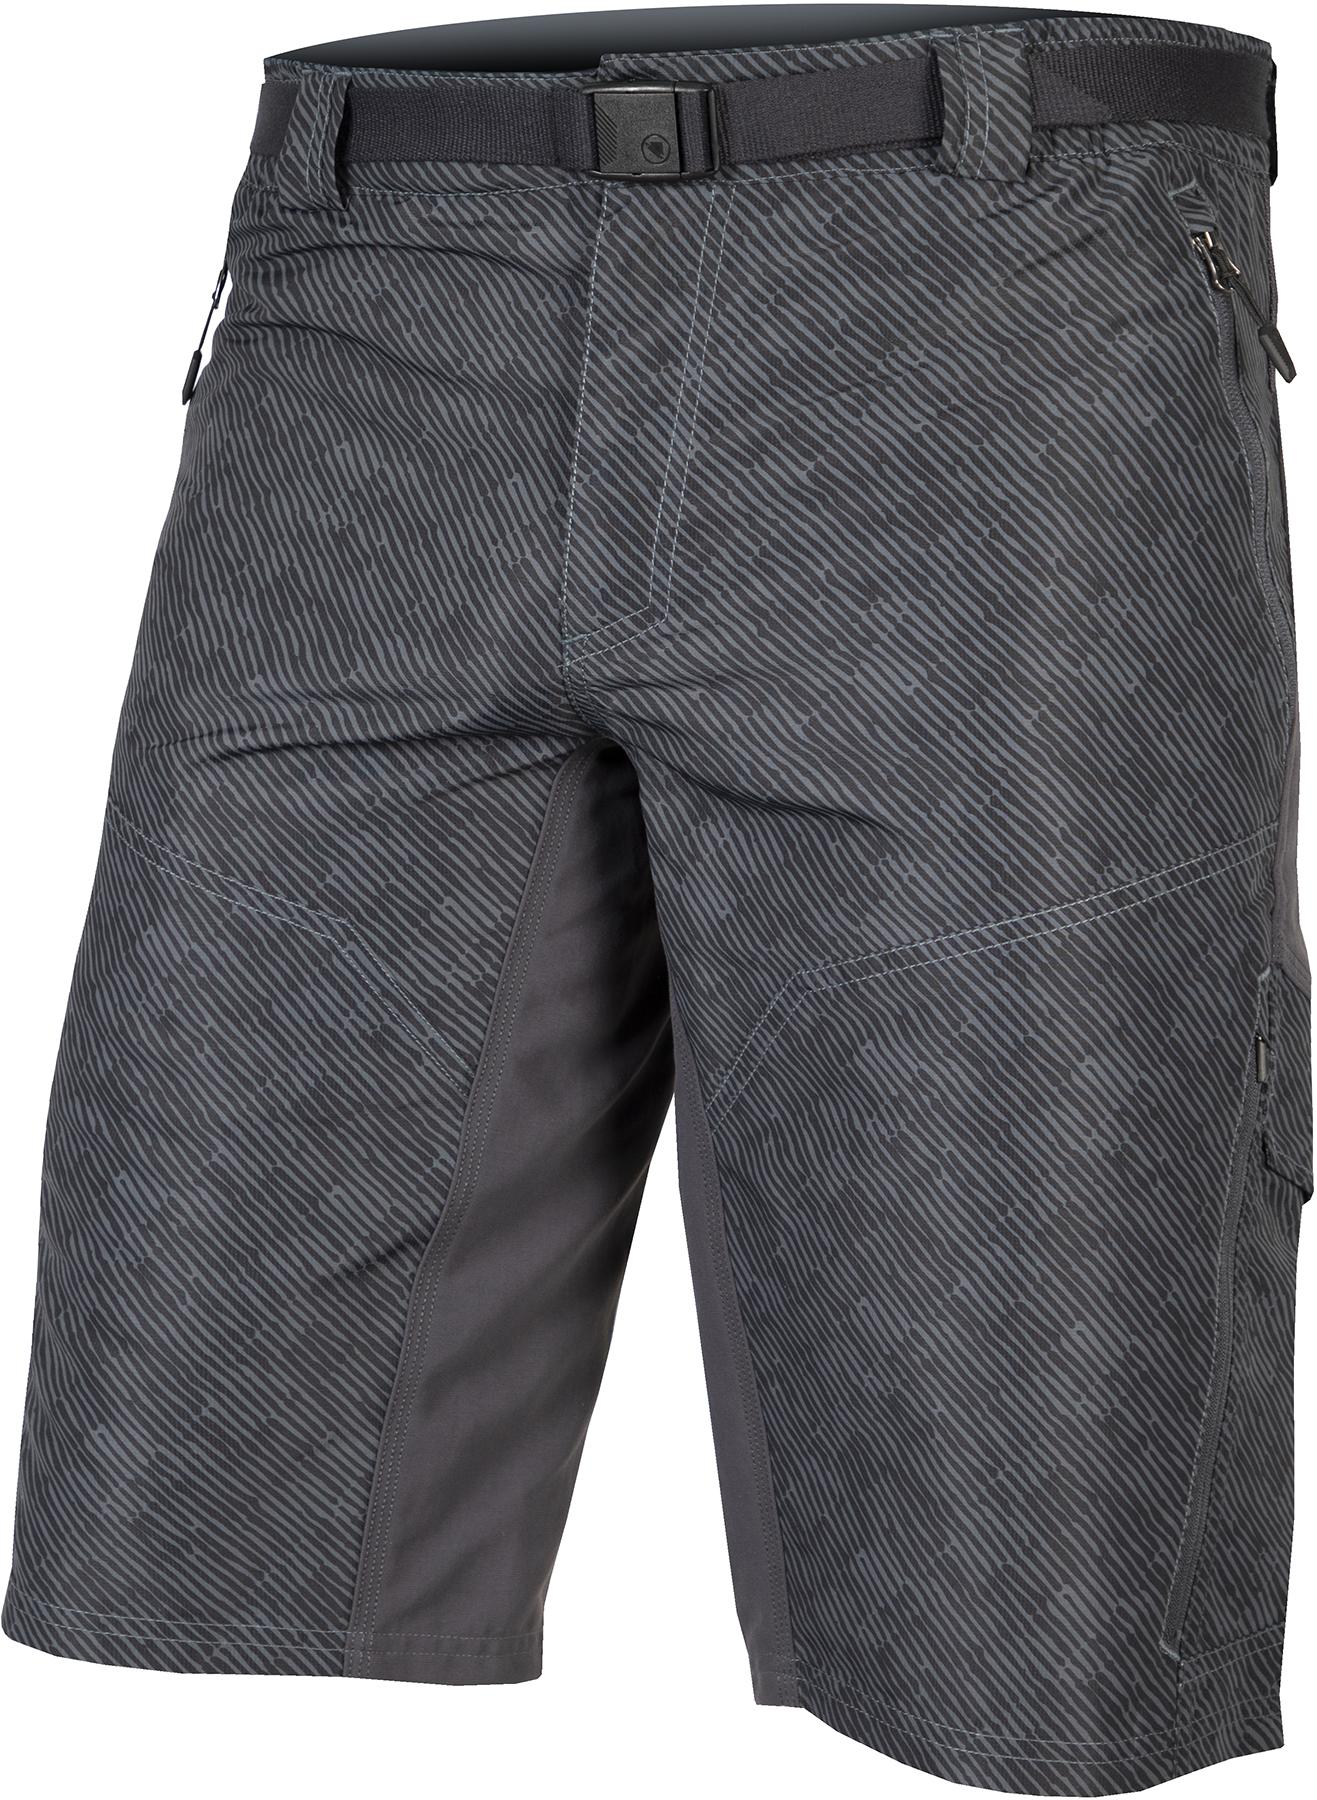 Endura Hummvee Short With Liner  Anthracite